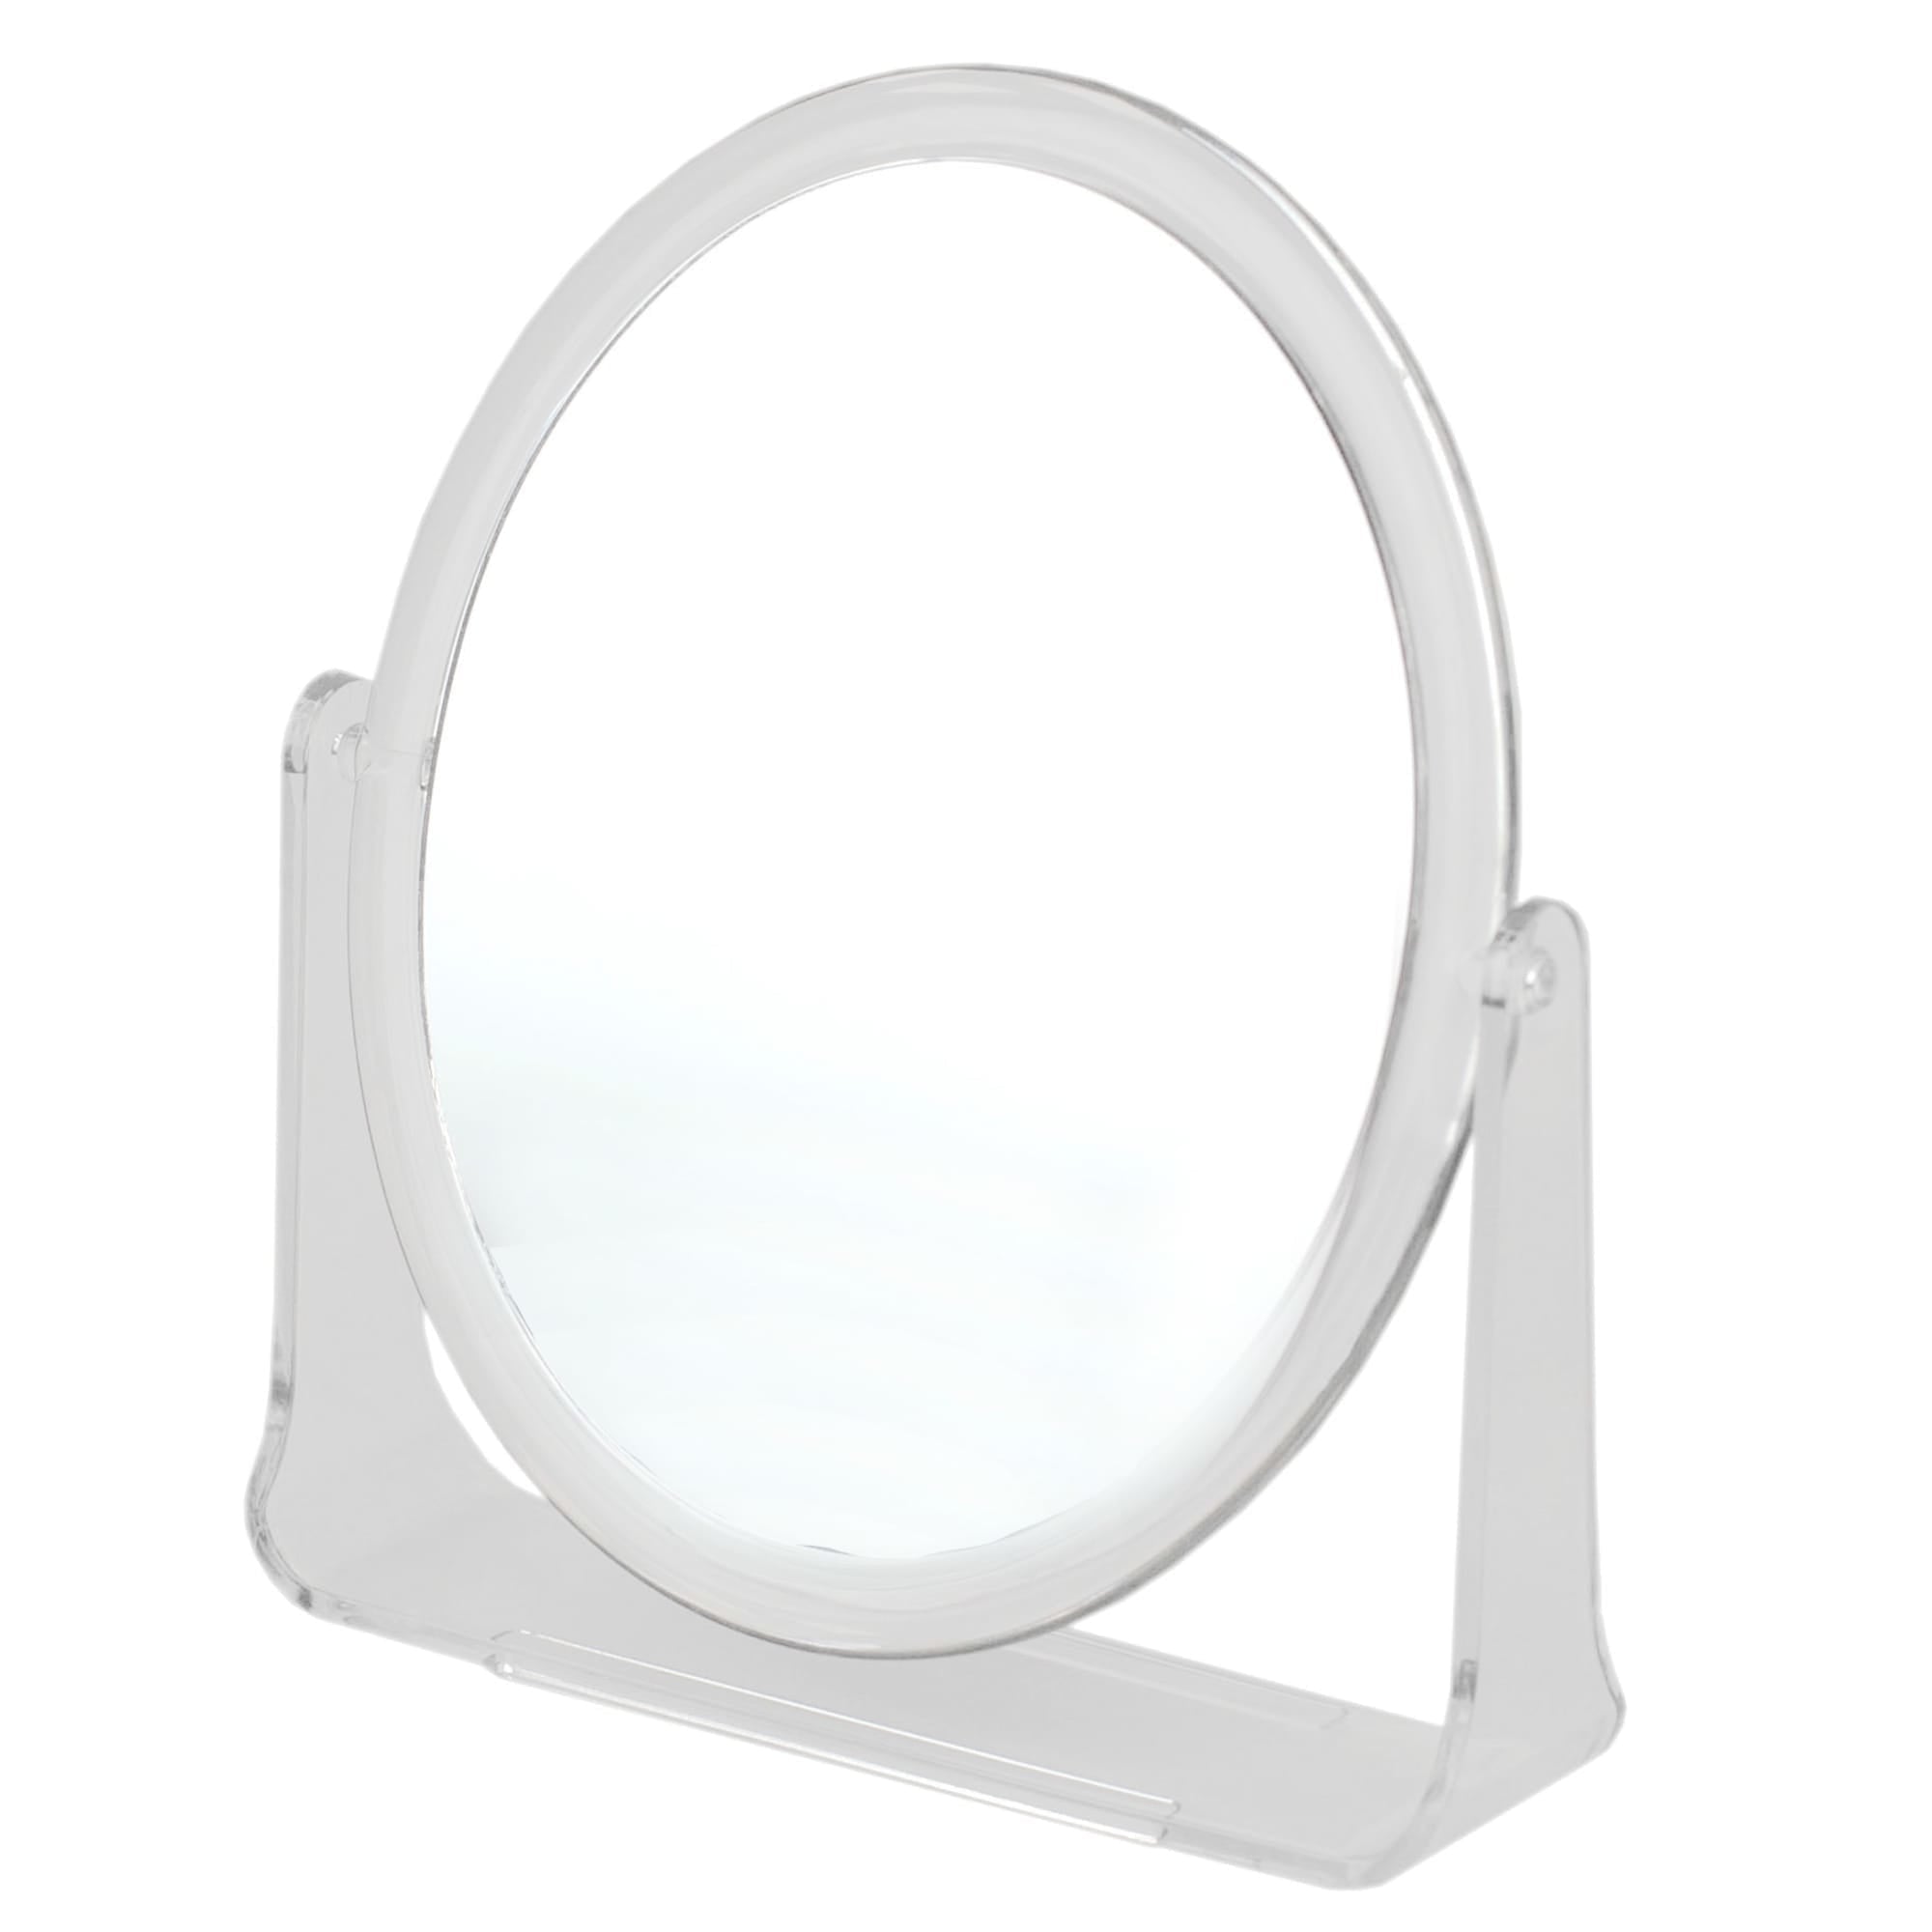 Home Basics Double Sided Tabletop and Countertop Mirror with Transparent Plastic Frame, Clear $3.00 EACH, CASE PACK OF 12